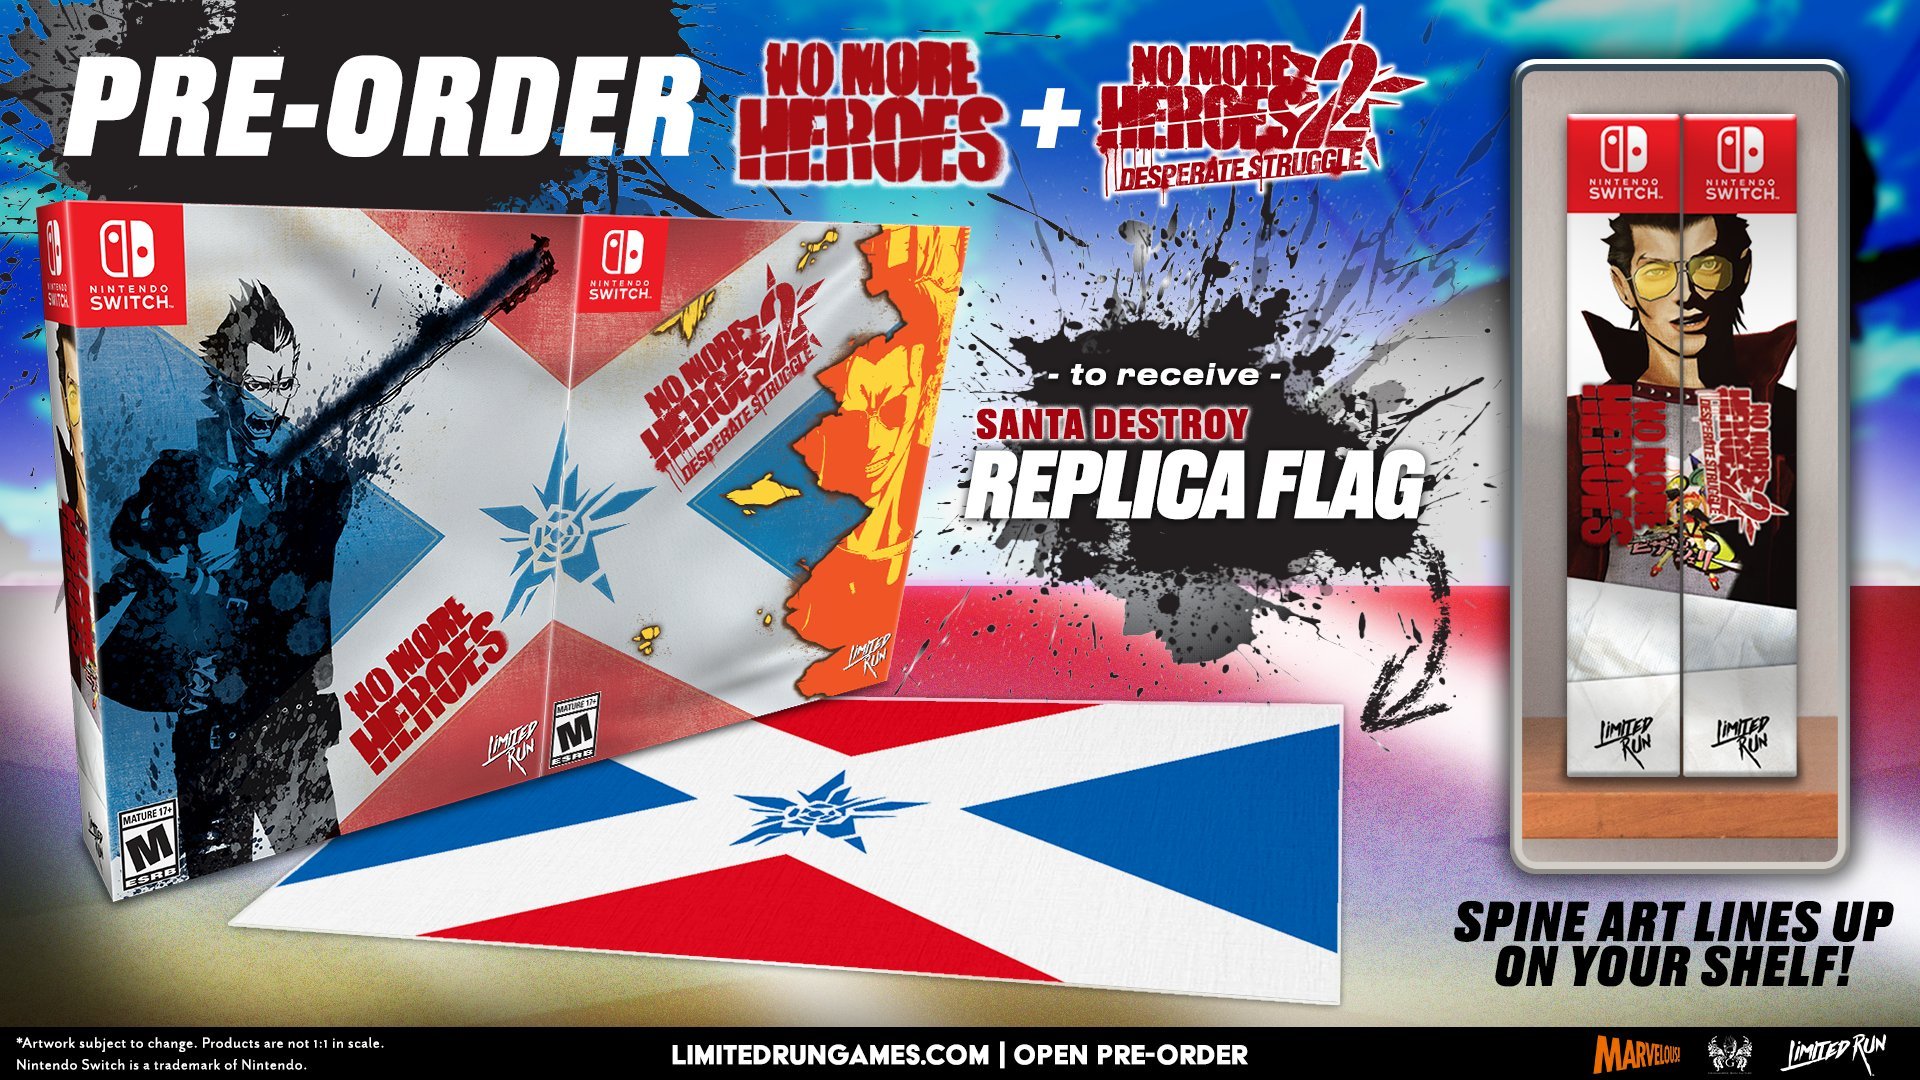 No More Heroes and No More Heroes 2: Desperate Struggle Switch, limited print physical pre-orders opened on March 12